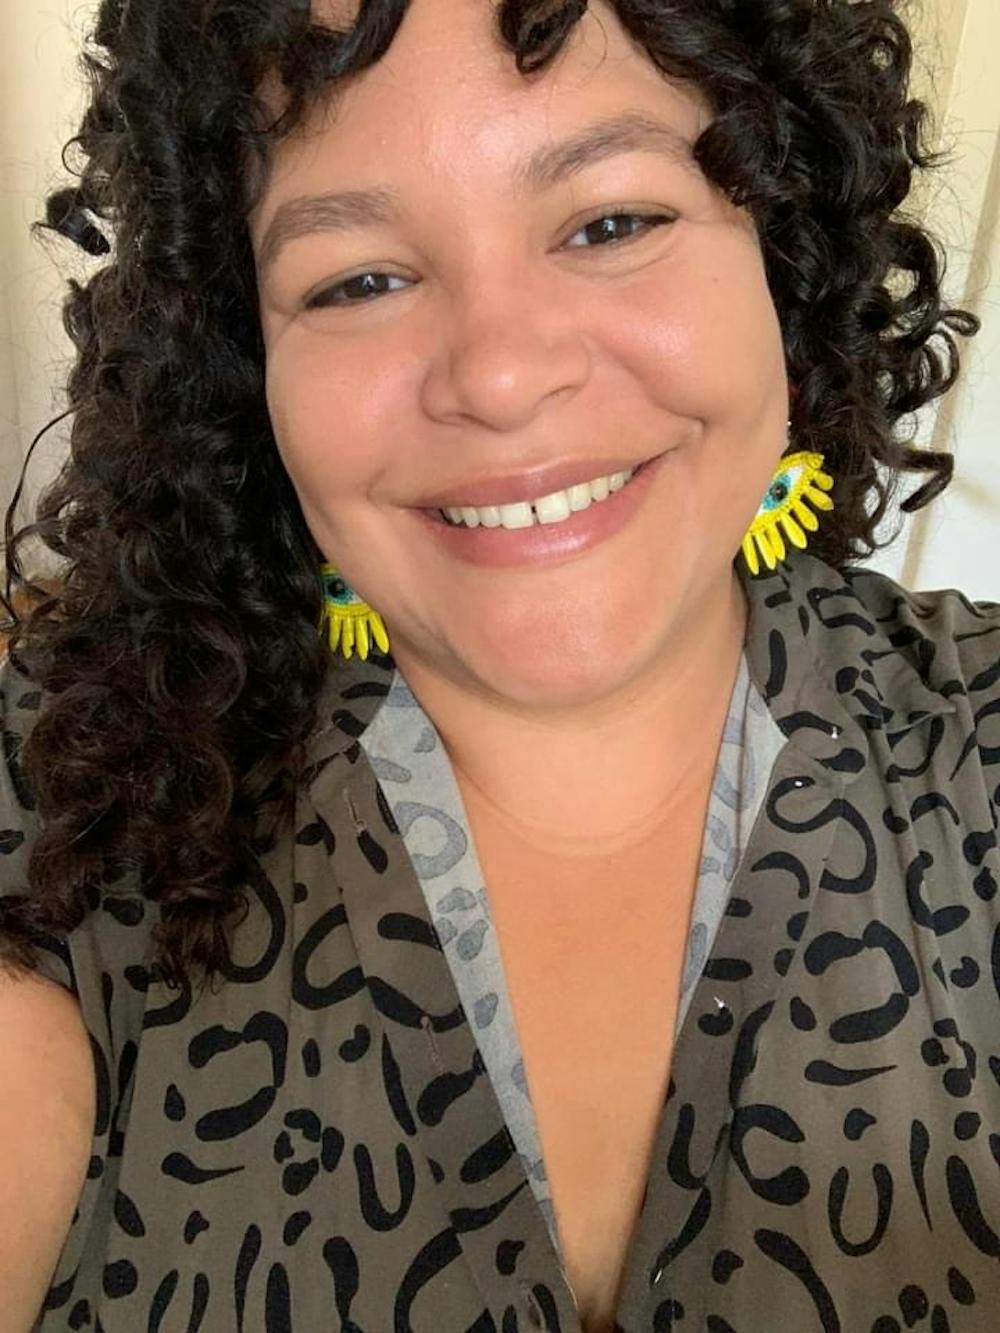 Raquel Albarrán was an assistant professor of Luso-Hispanic studies
and is remembered as a loving friend, passionate community leader and
revolutionary scholar.